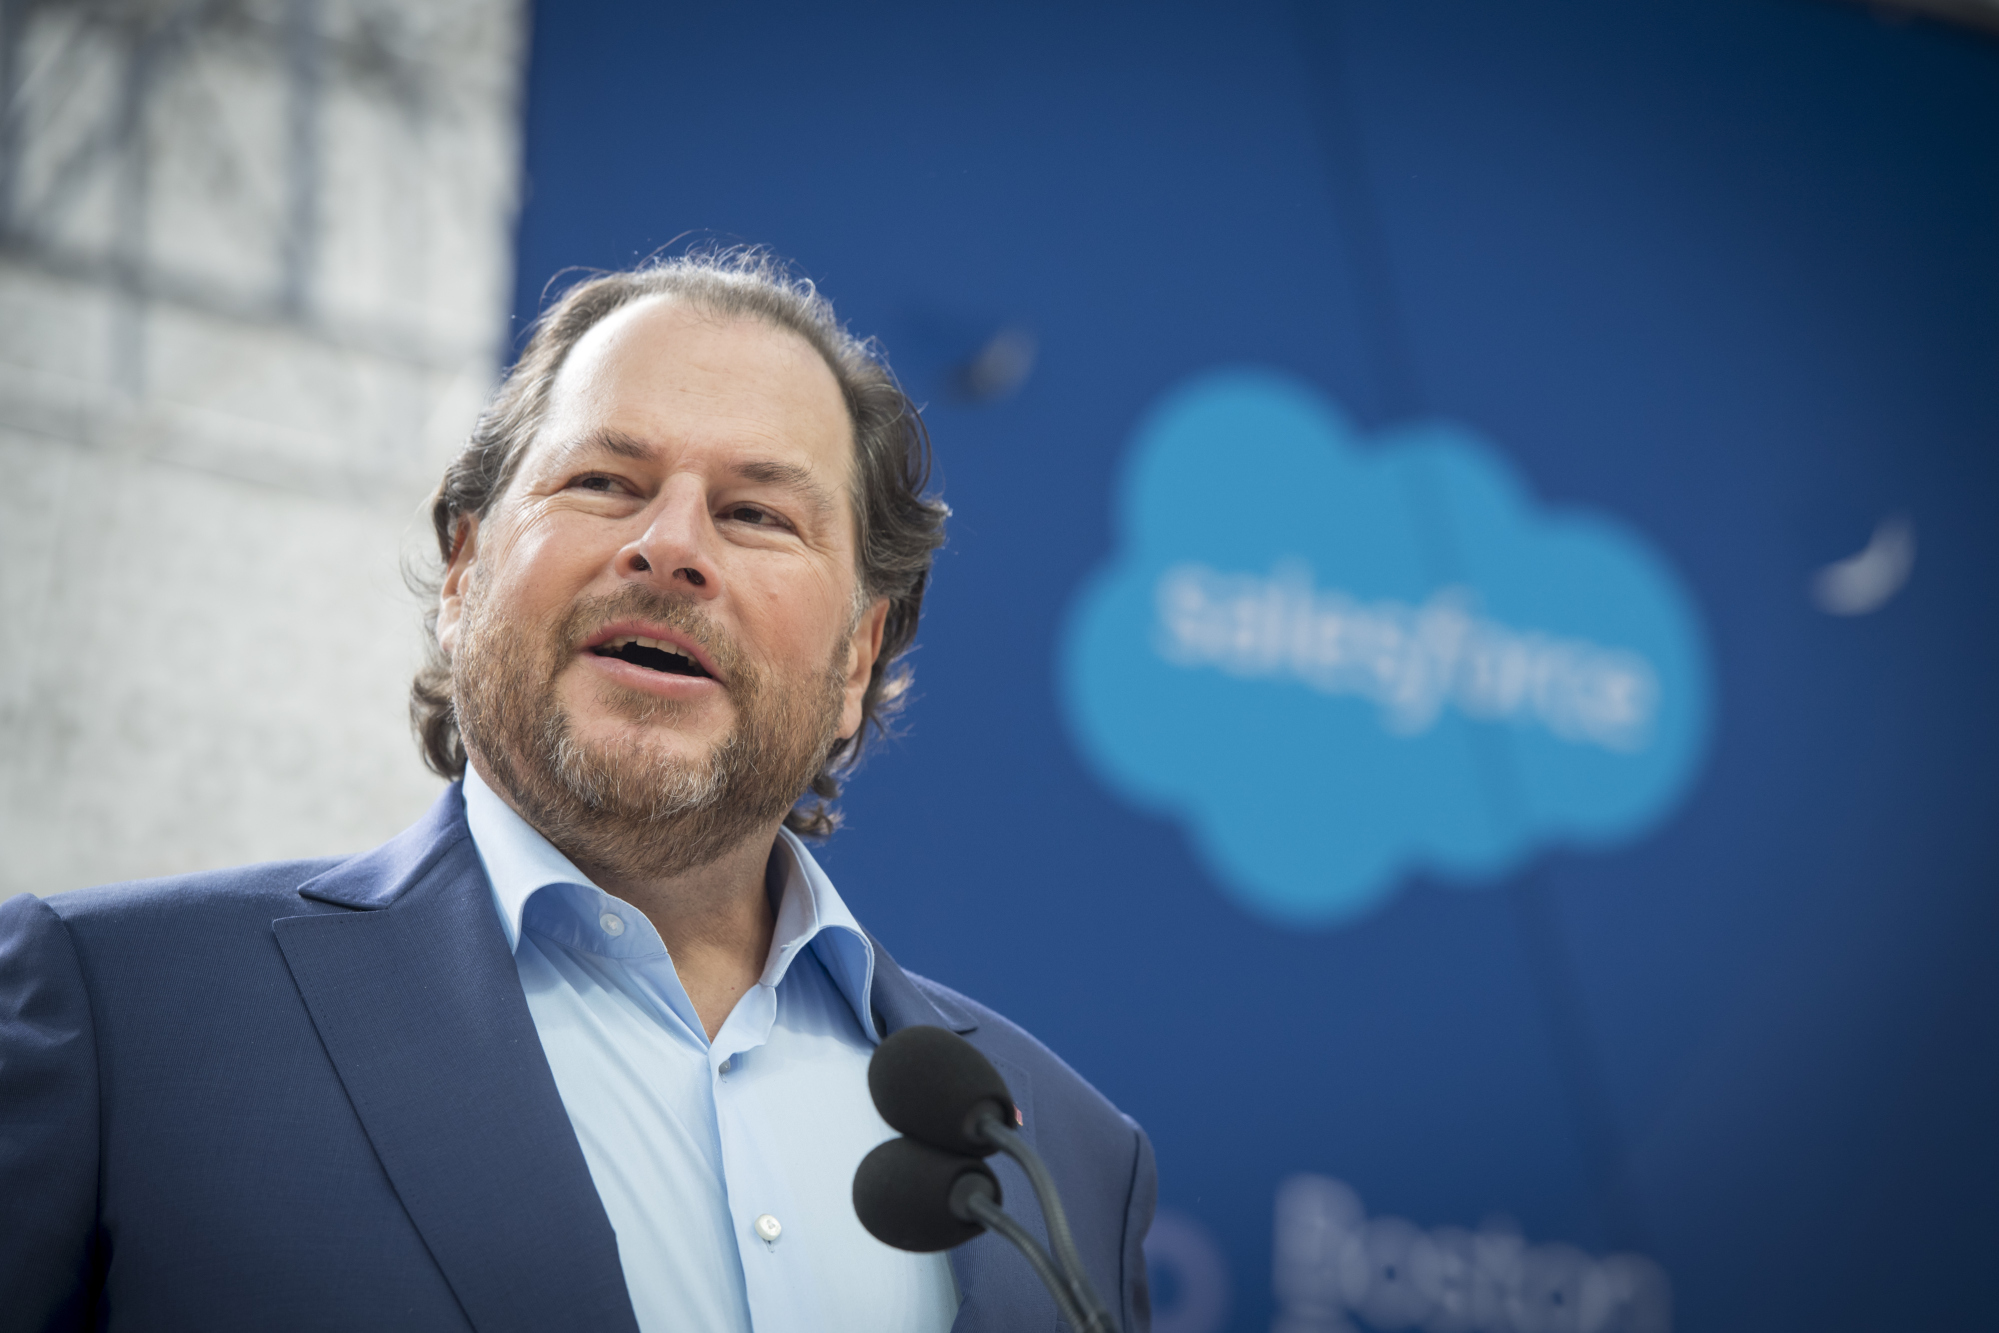 Marc Benioff, chairman and chief executive officer of Salesforce.com Inc., speaks during an event.